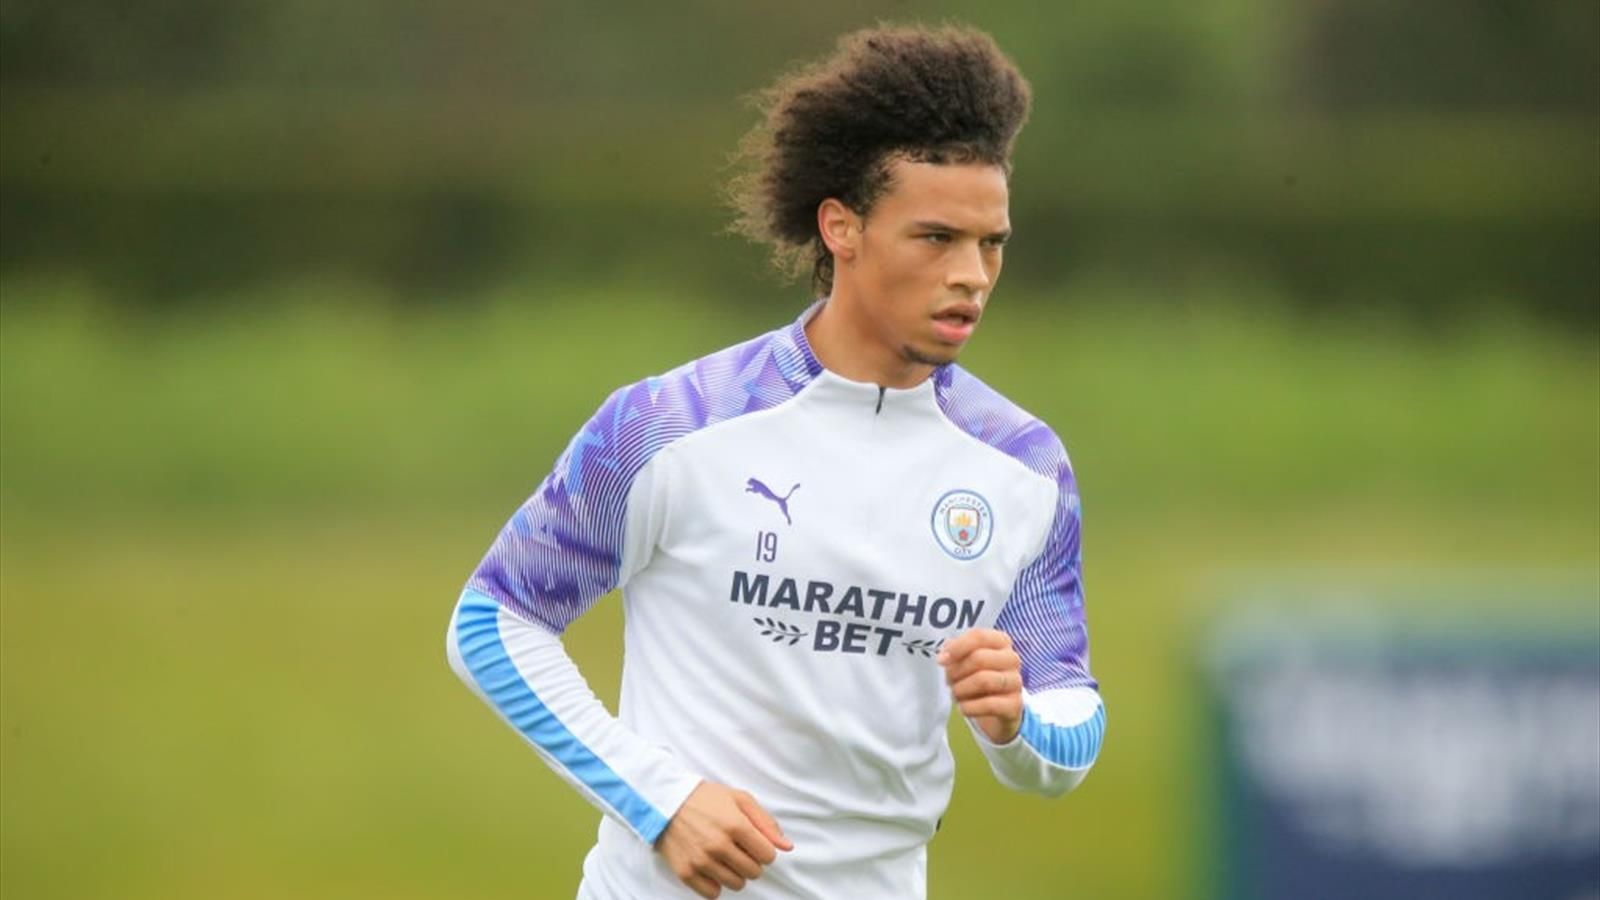 Leroy Sane has declined the new contract offer from the club  